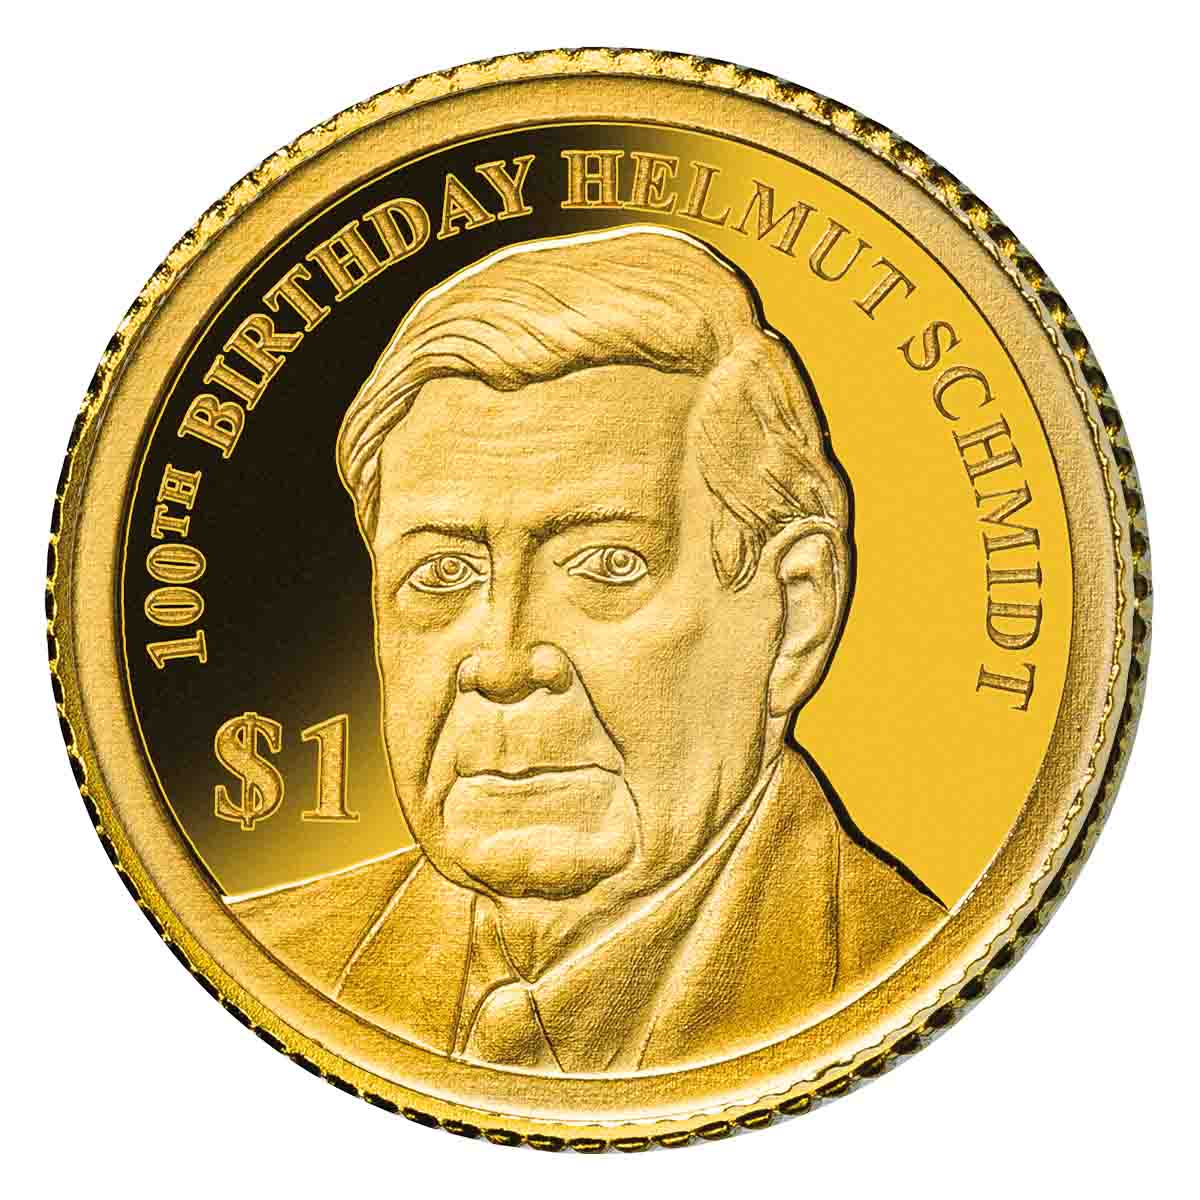 100th Anniversary of Helmut Schmidt 2018 $1 Gold Proof Coin